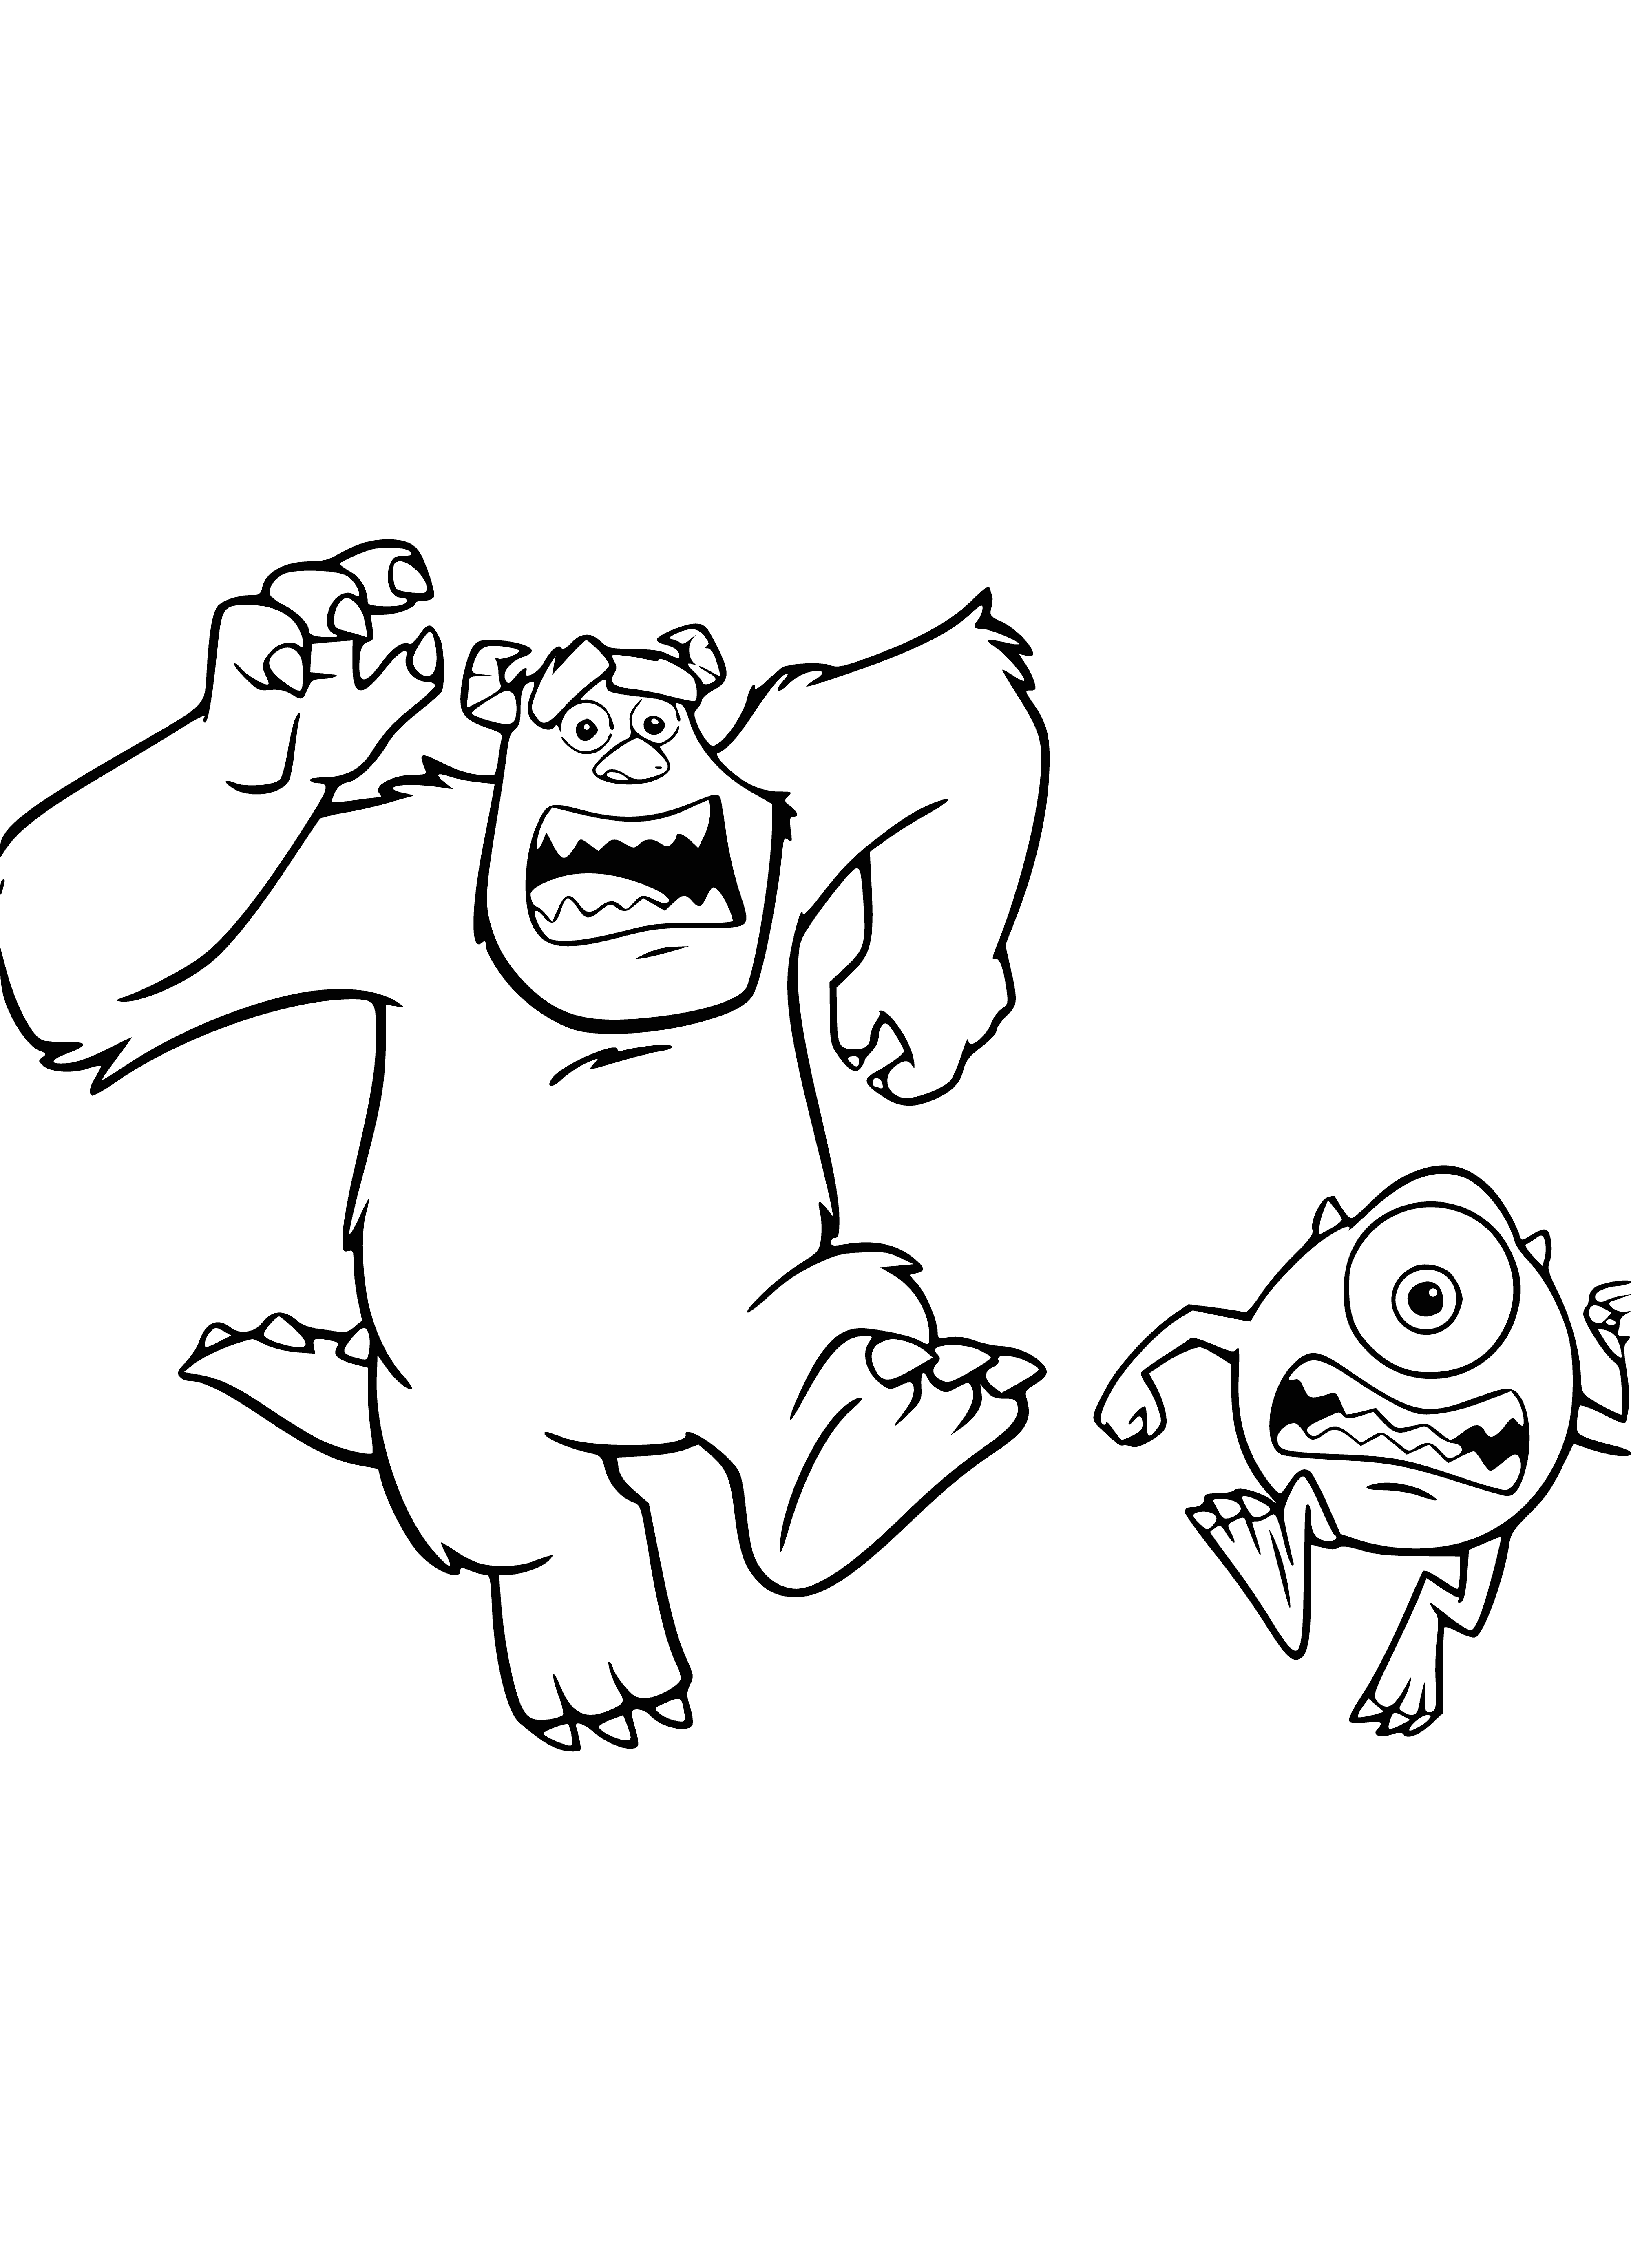 coloring page: Two monsters racing: purple one with four eyes & two horns; green one with one eye & two horns; wearing blue shirts with white polka dots.